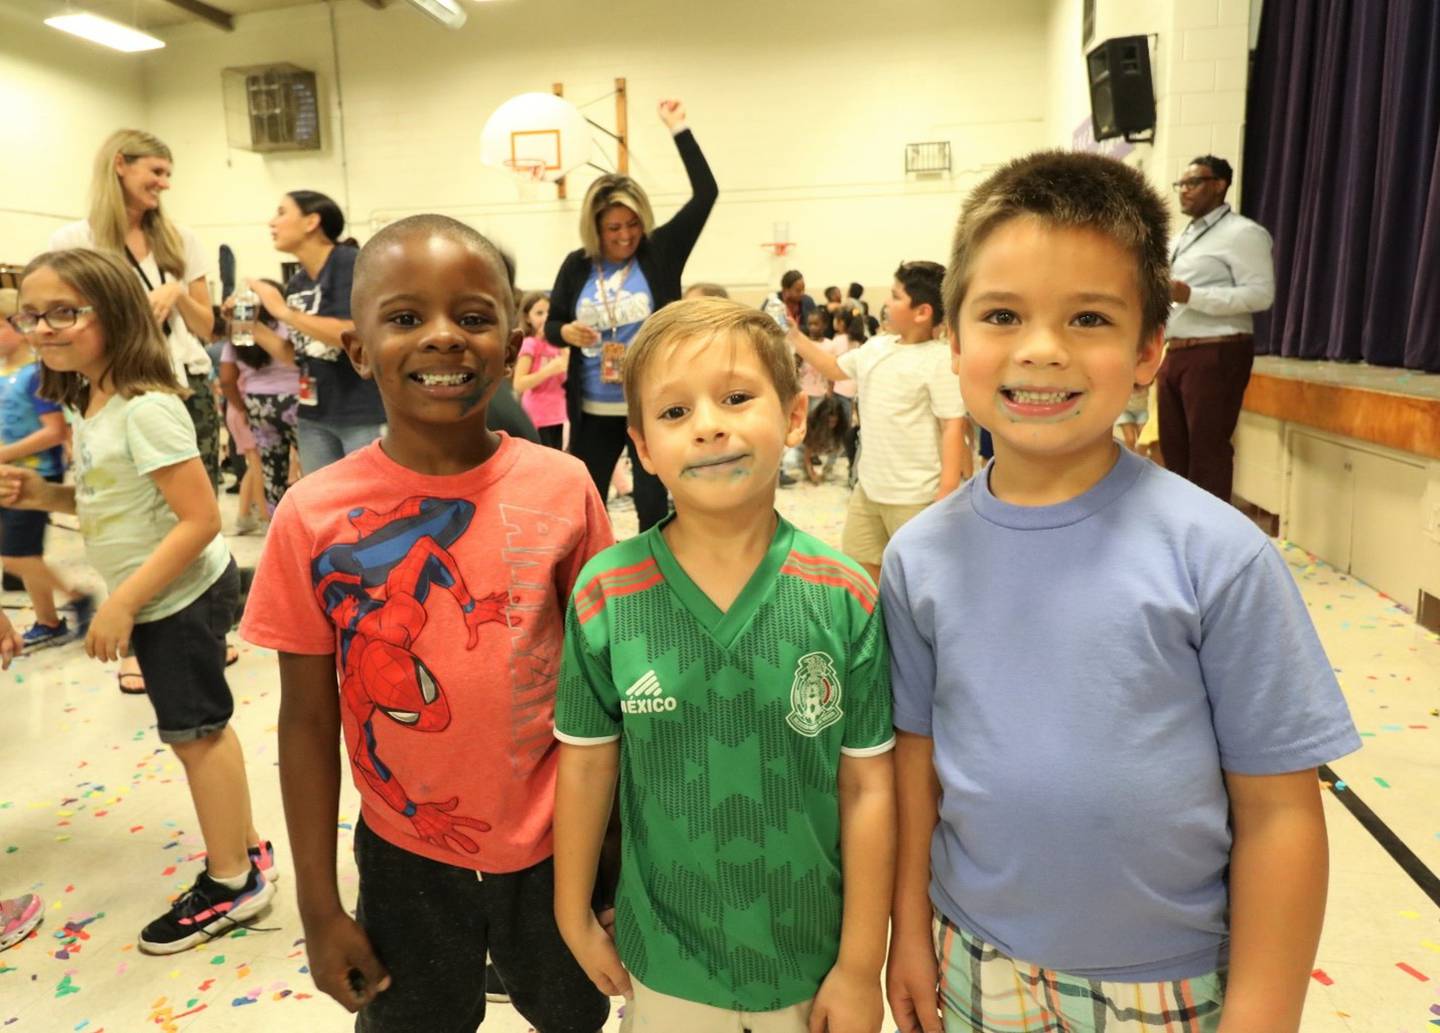 Eisenhower Academy was named a 2022 National Blue Ribbon School on Friday, Sept. 16, 2022. Students and staff celebrated their achievements that same day with music, blue cupcakes and confetti. Pictured, from left, are Eisenhower students Carter Hines, Edwin Padilla and Edward Dinges.